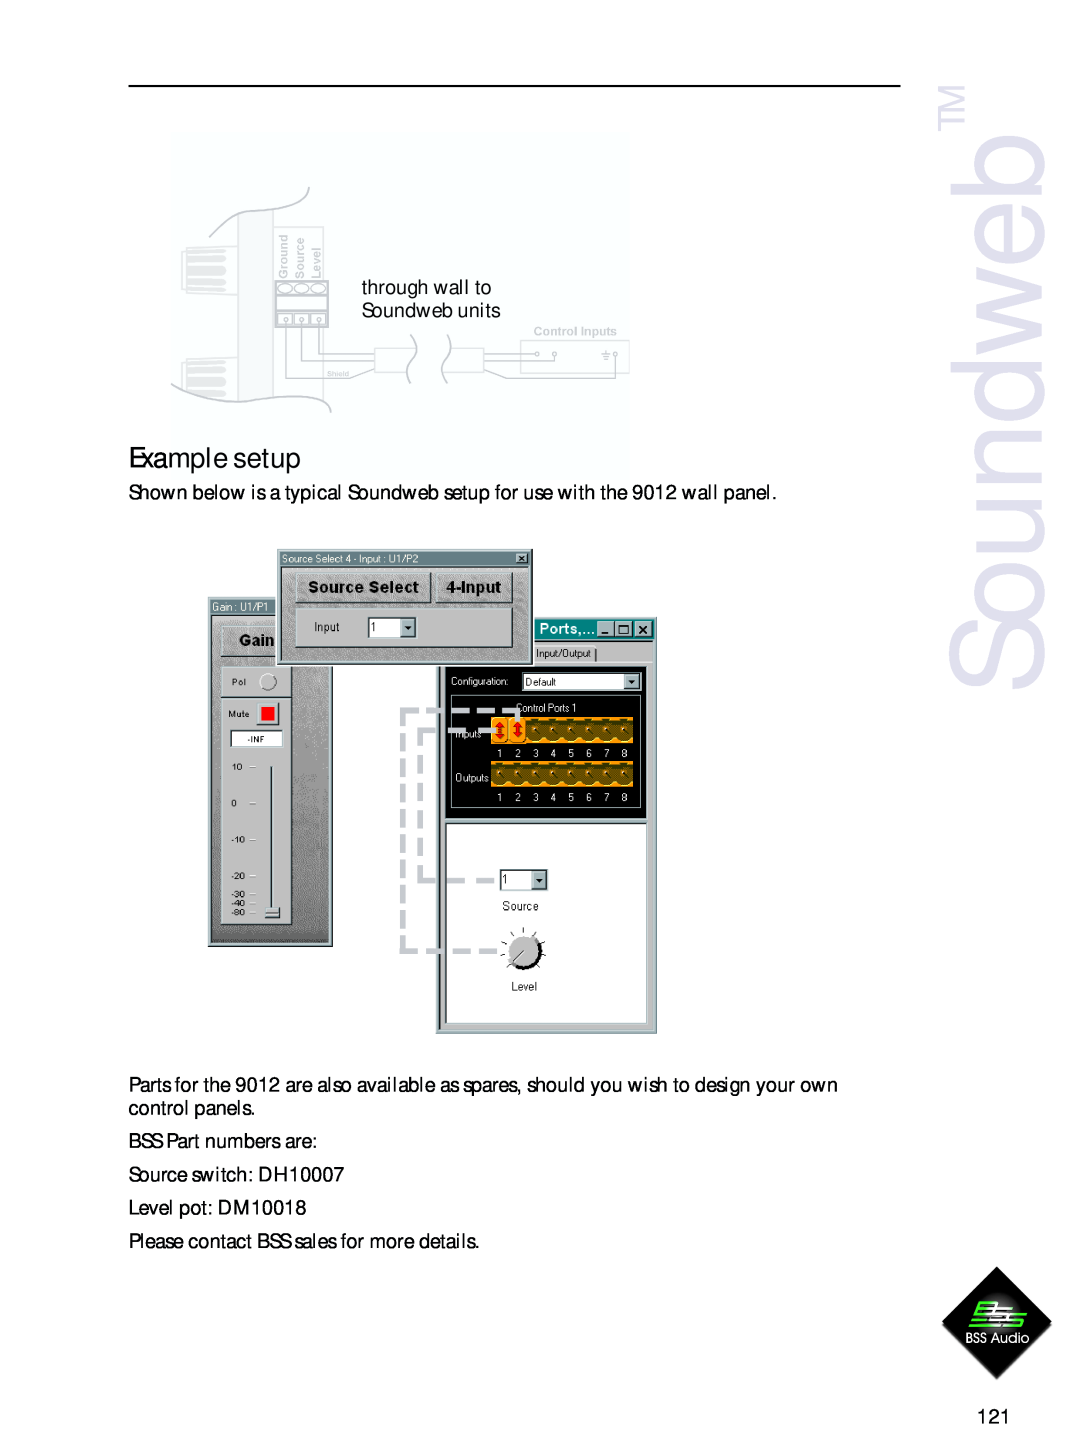 BSS Audio 9012 manual Example setup, SoundwebTM, through wall to Soundweb units, Please contact BSS sales for more details 